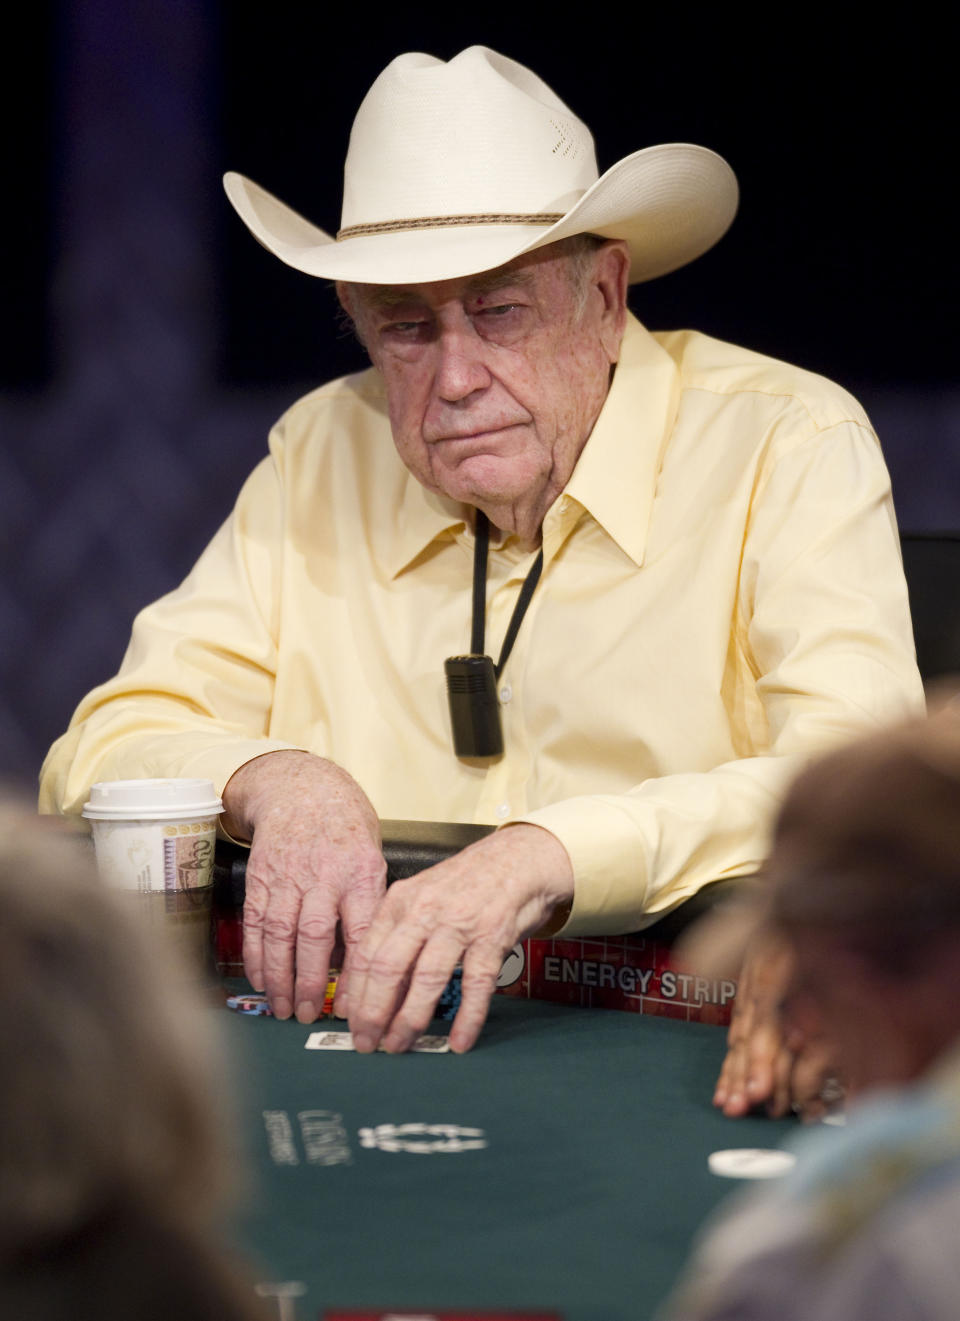 FILE - Doyle Brunson competes on the first day of the World Series of Poker, on July 7, 2011, at the Rio All-Suite Hotel & Casino in Las Vegas. Brunson, one of the most influential poker players of all time and a two-time world champion, died Sunday, May 14, 2023, according to his agent. He was 89. (AP Photo/Eric Jamison, File)